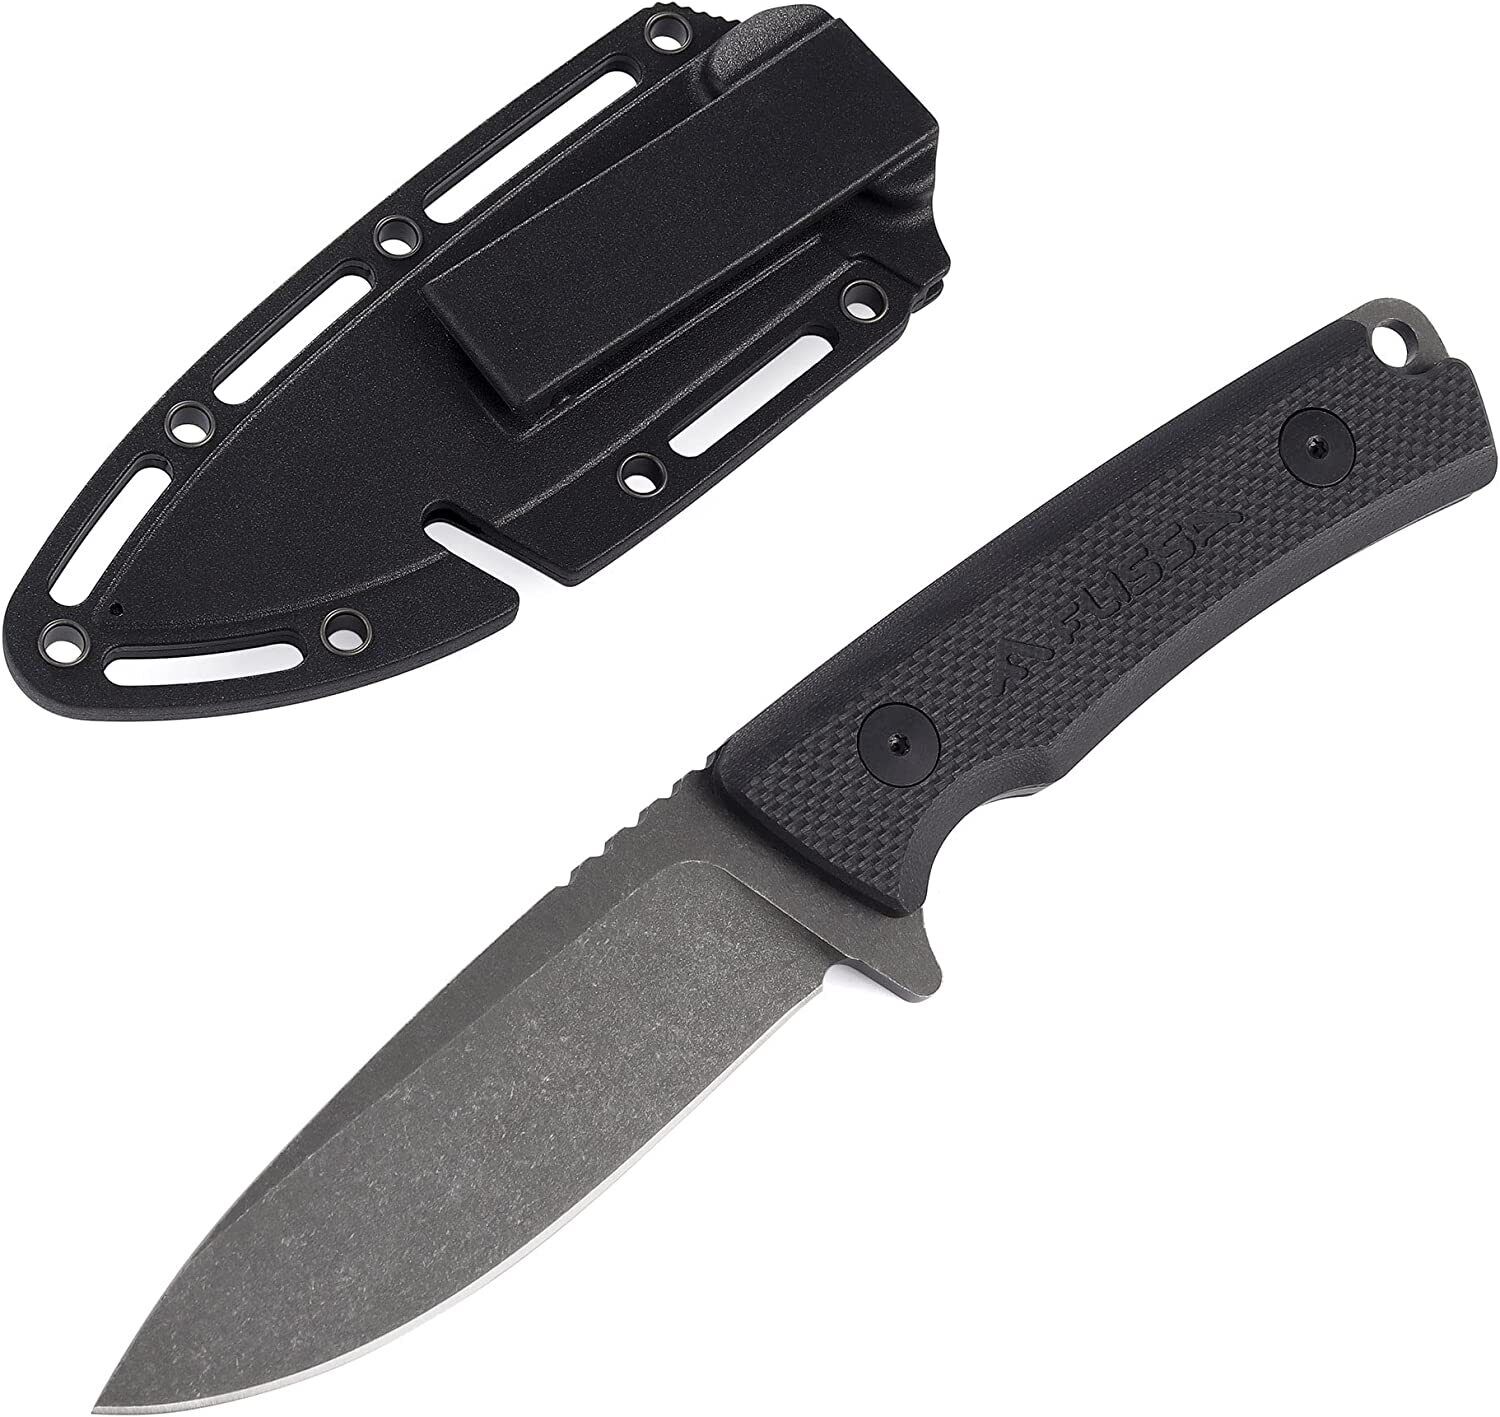 Flissa 8-1/2-inch Fixed Blade Hunting Knife Full Tang G10 Handle Survival Knife